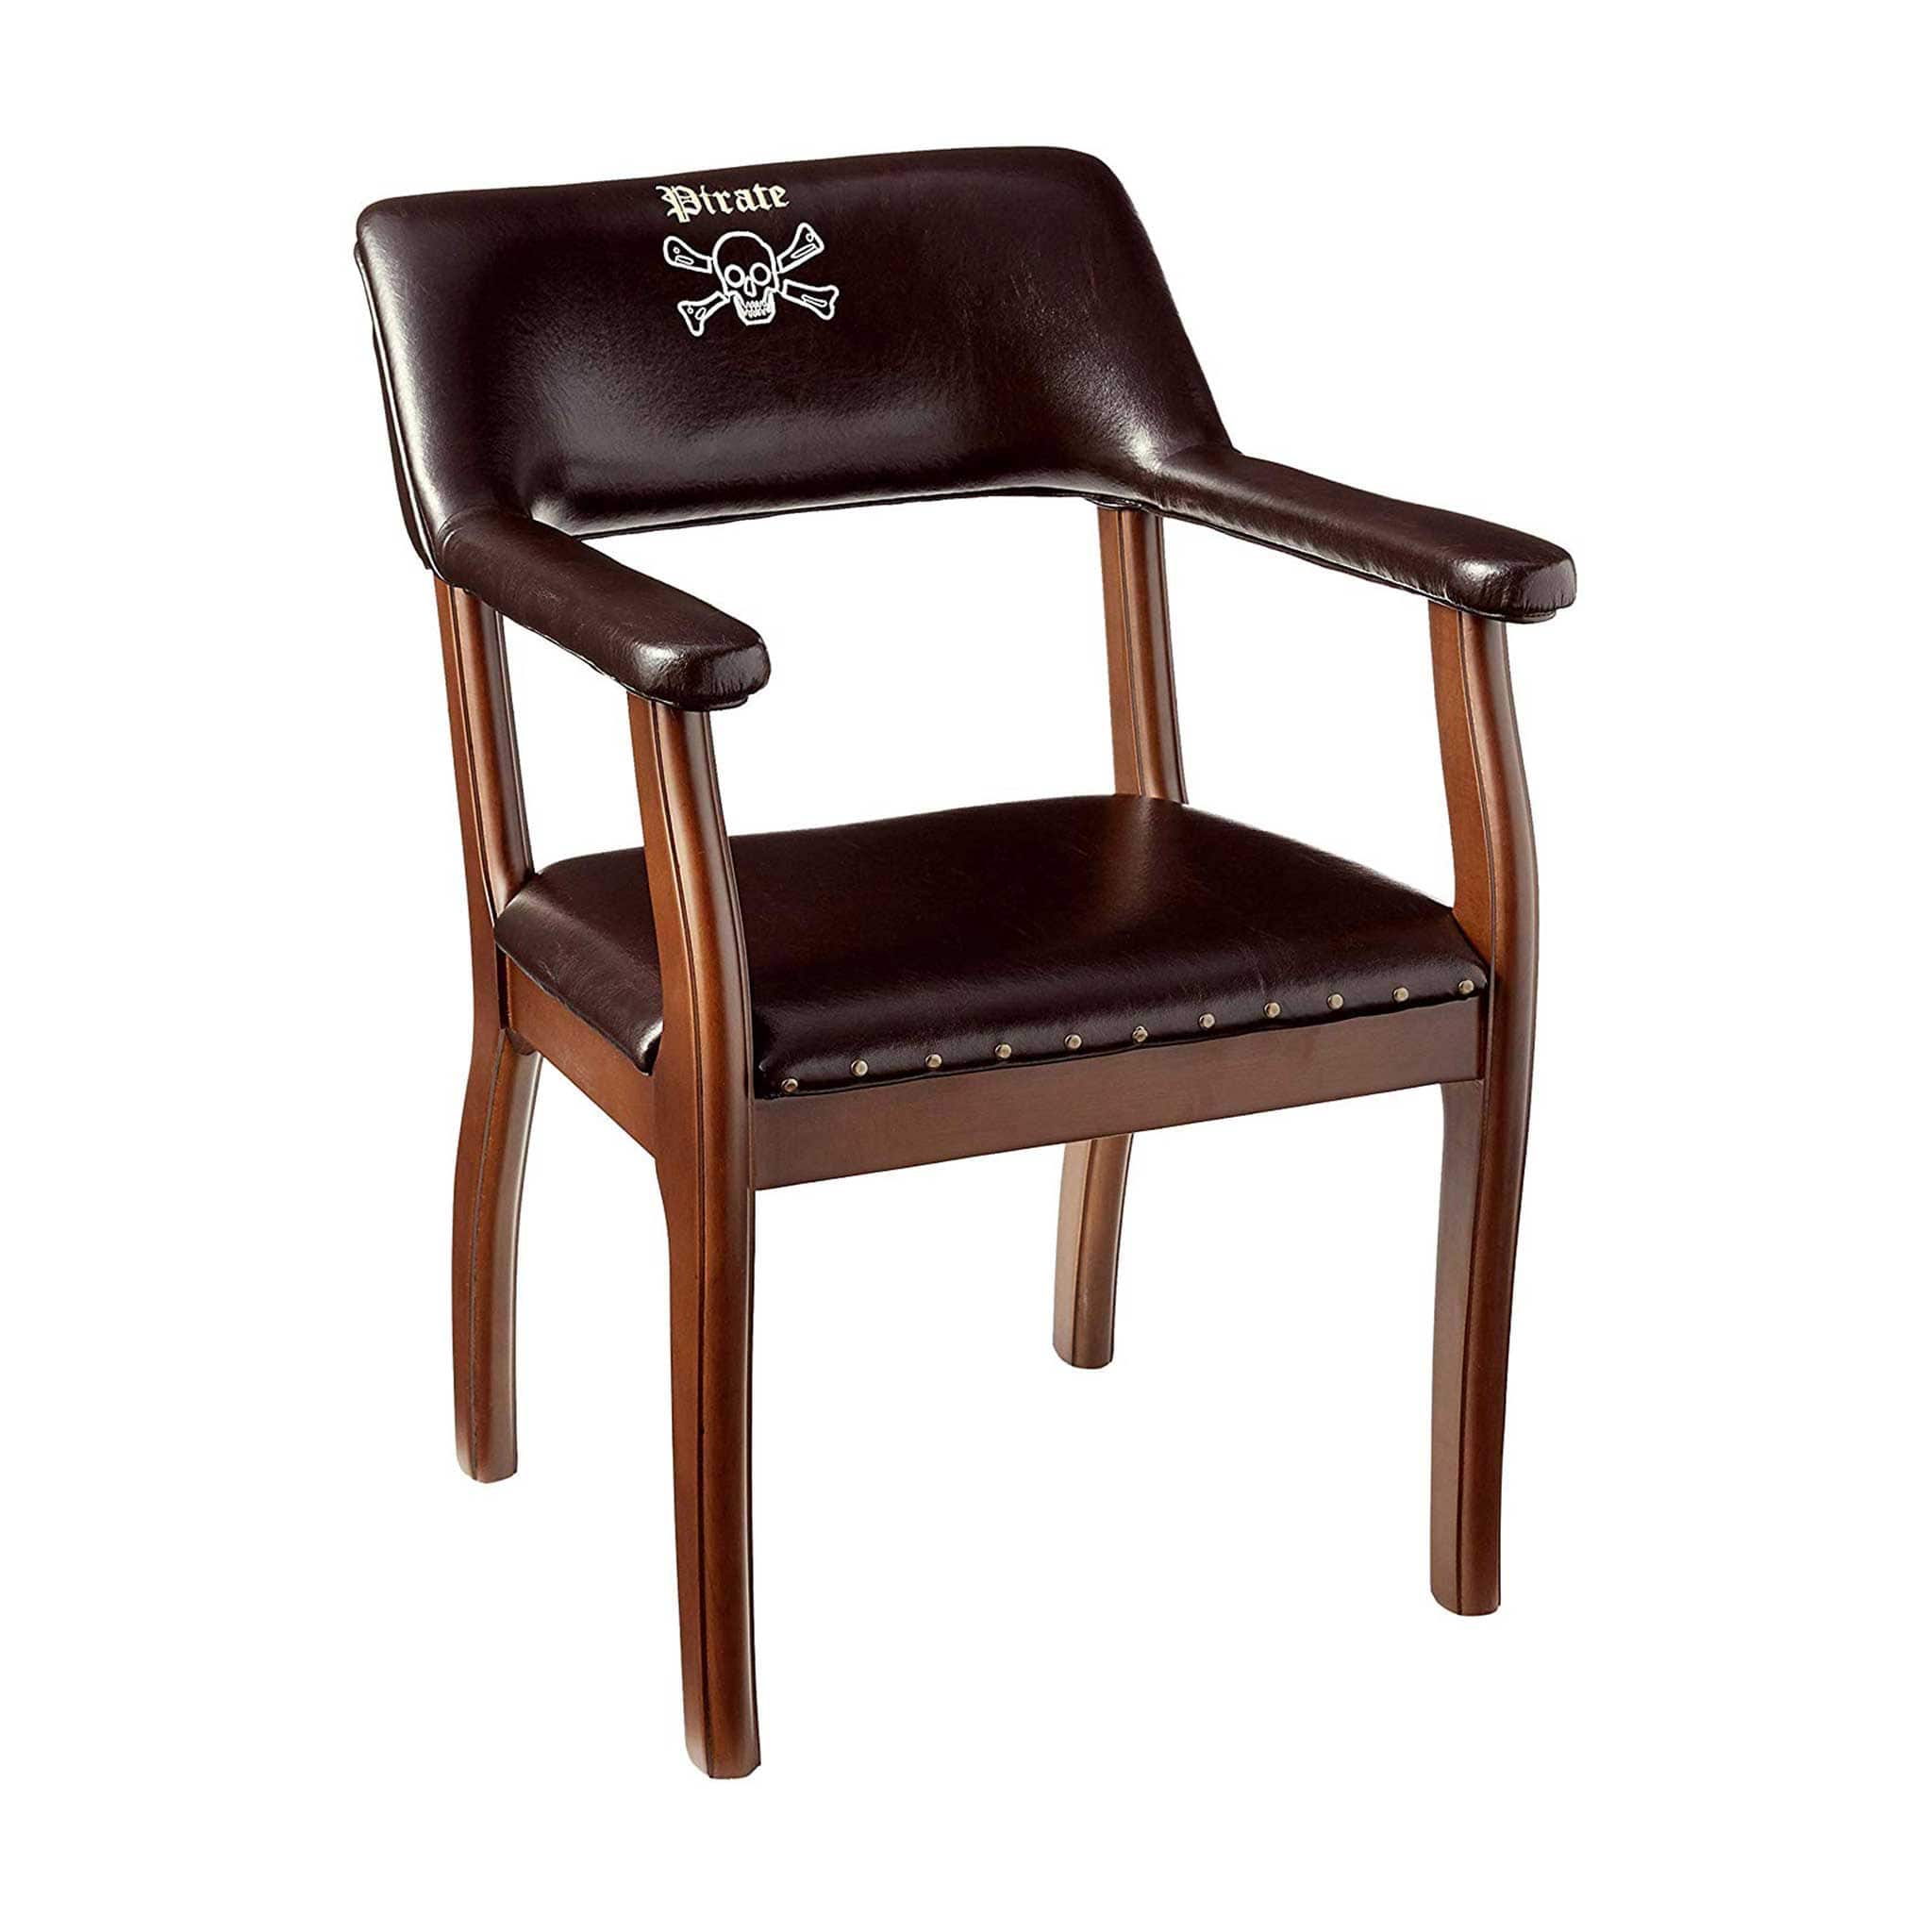 Pirate Brown Wooden Legged Leatherette Chair